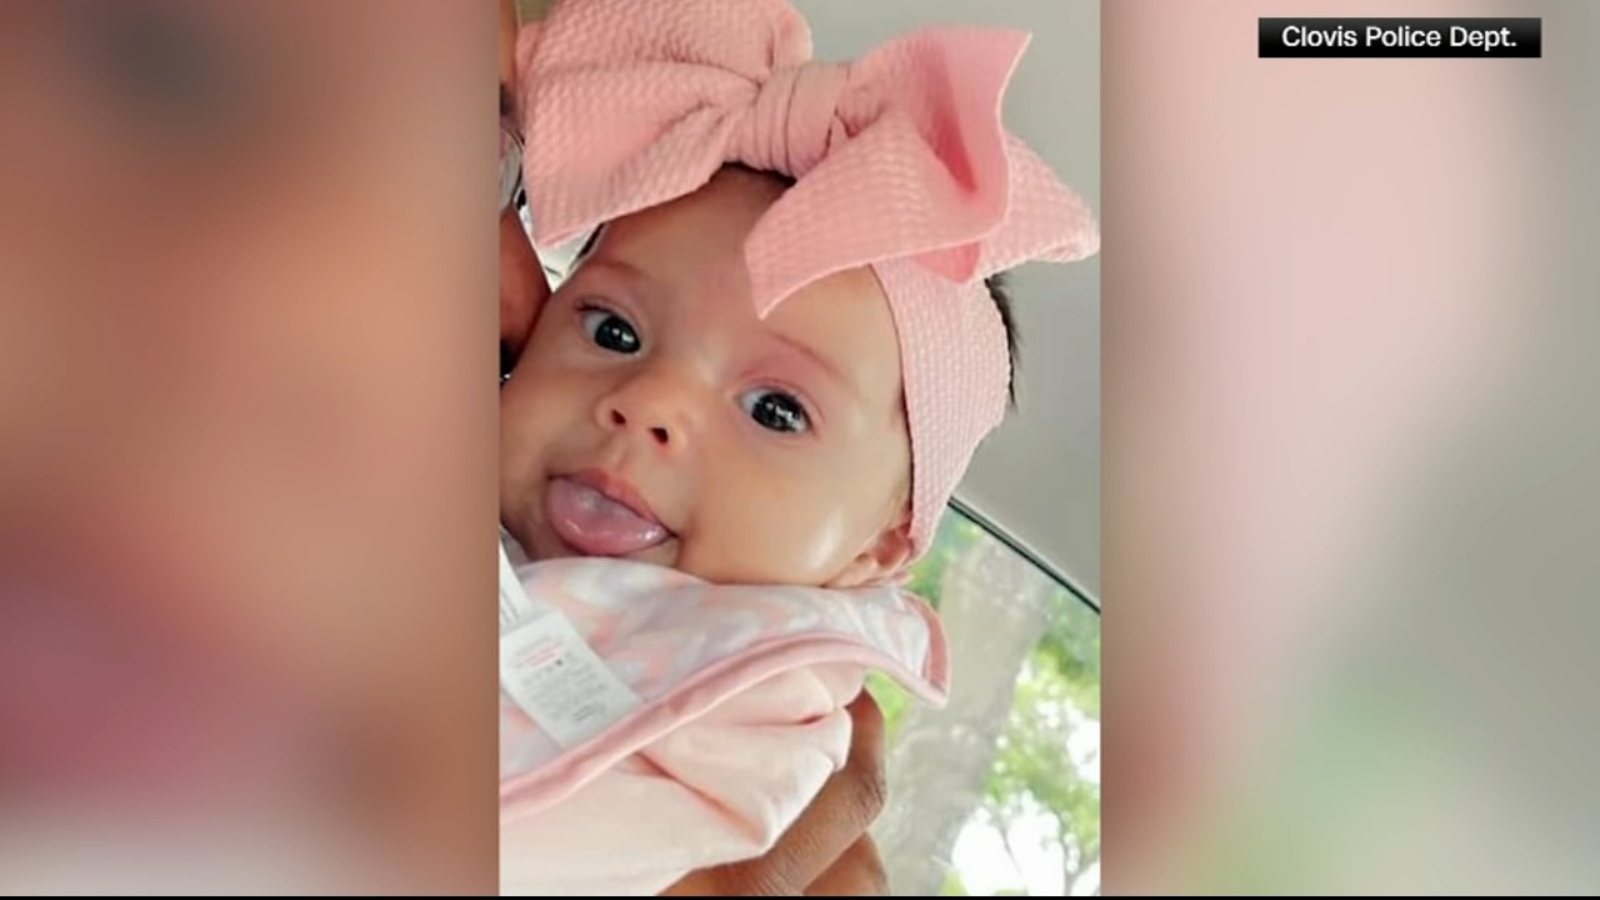 Abducted baby found, mother among 2 killed in Clovis, New Mexico; suspect in custody, FBI says